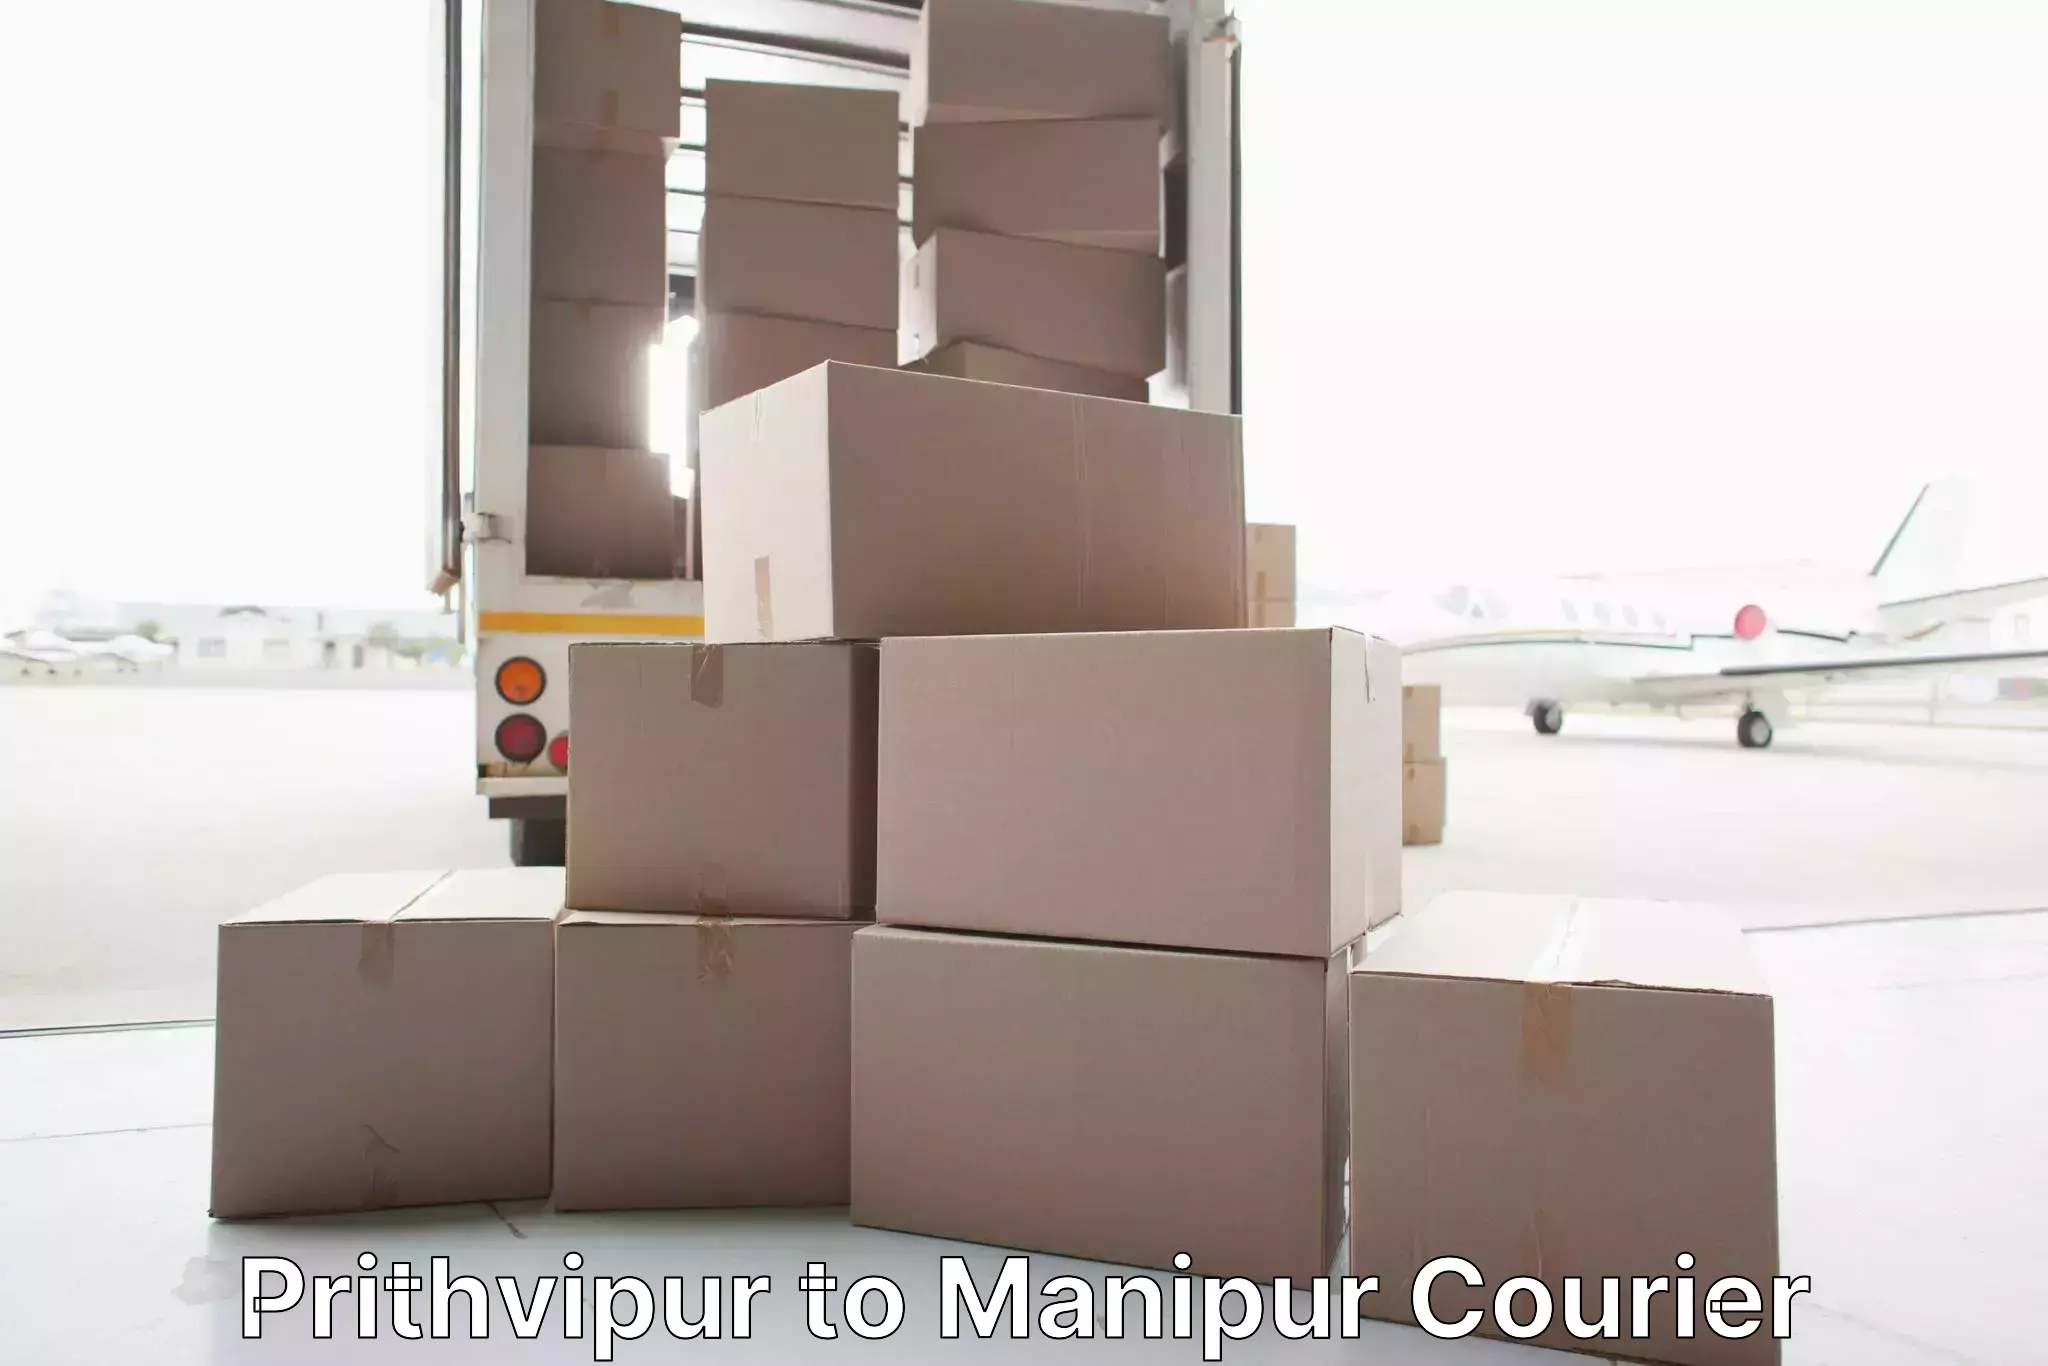 Skilled furniture movers in Prithvipur to Kakching